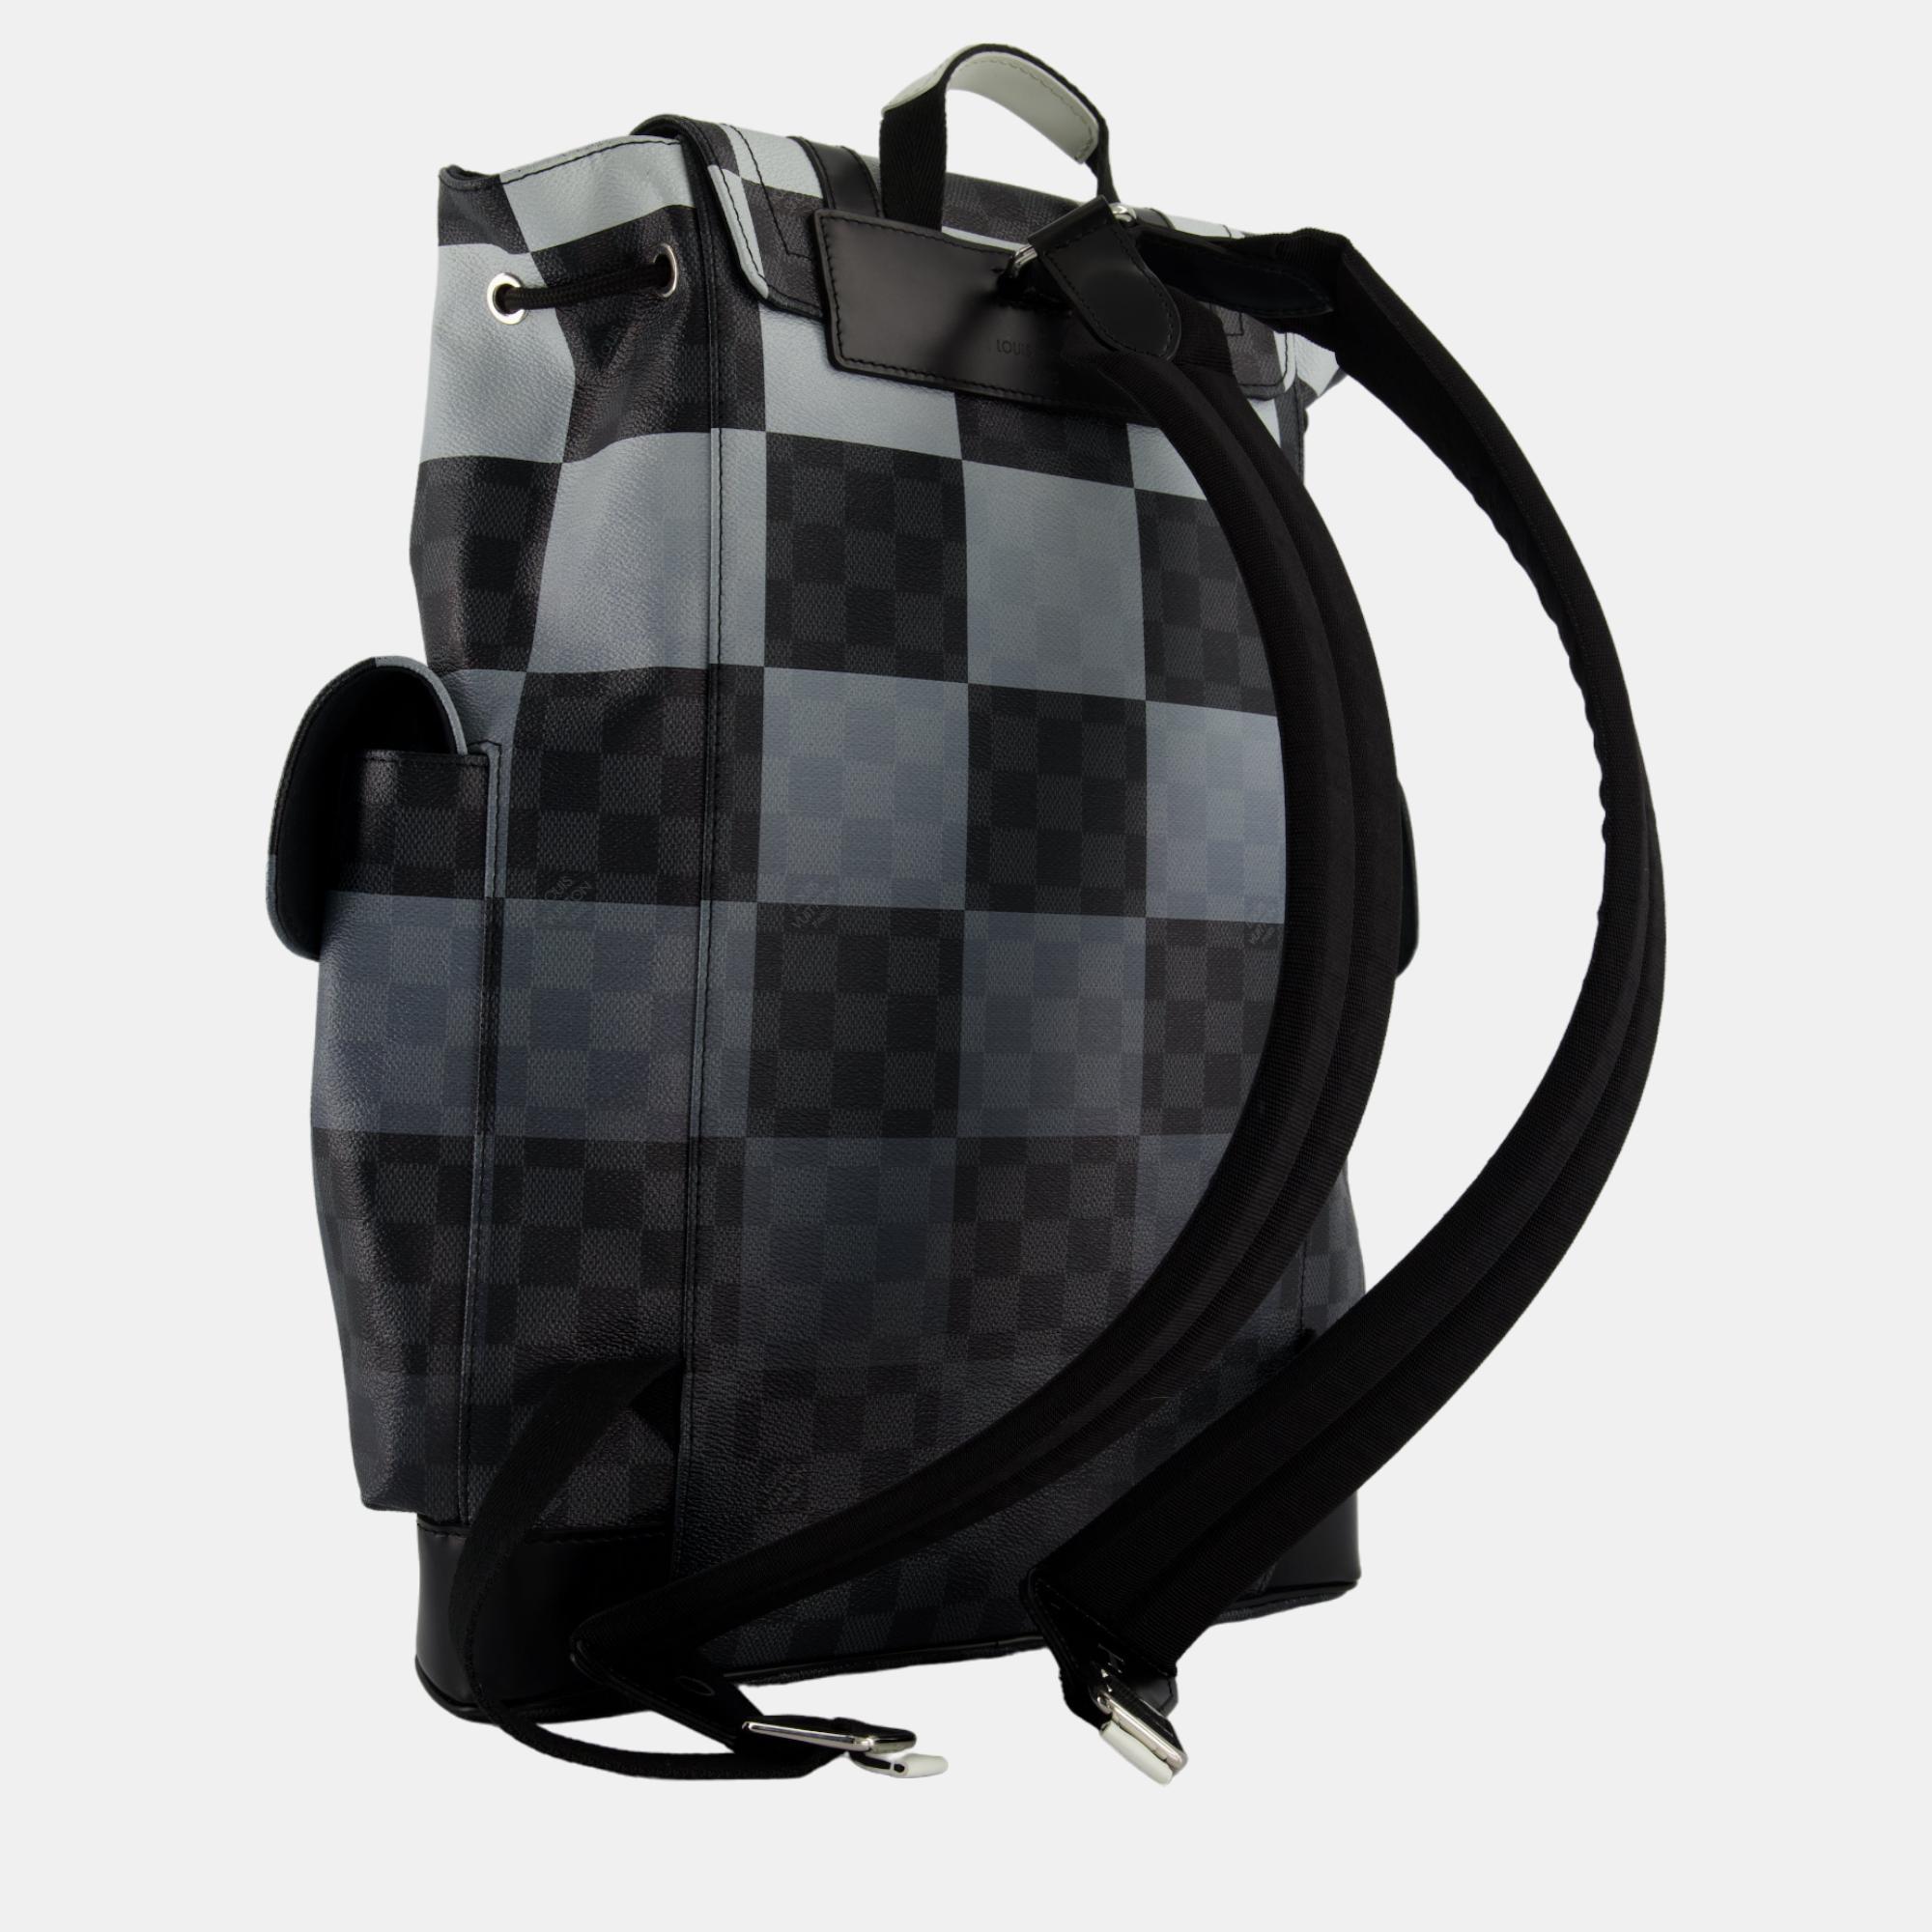 Louis Vuitton Christopher Backpack Bag In Black And White Damier Canvas With Silver Hardware